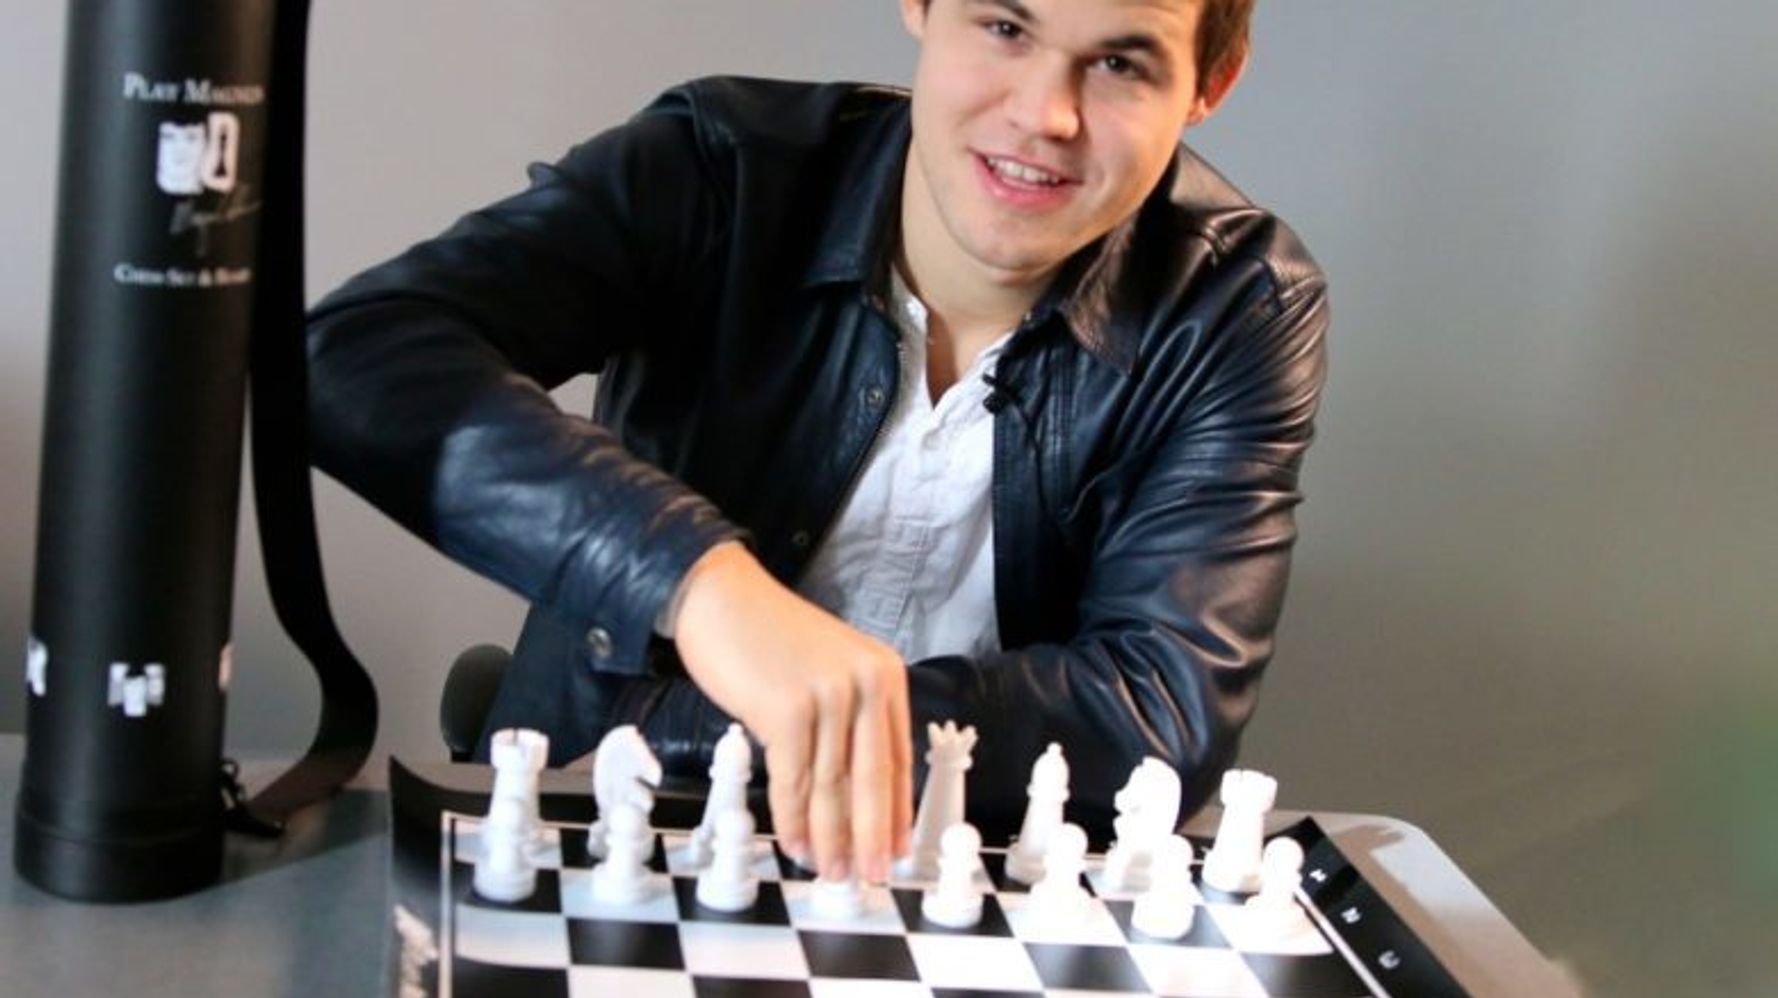 Play Like Magnus Carlsen - Chess Lessons 